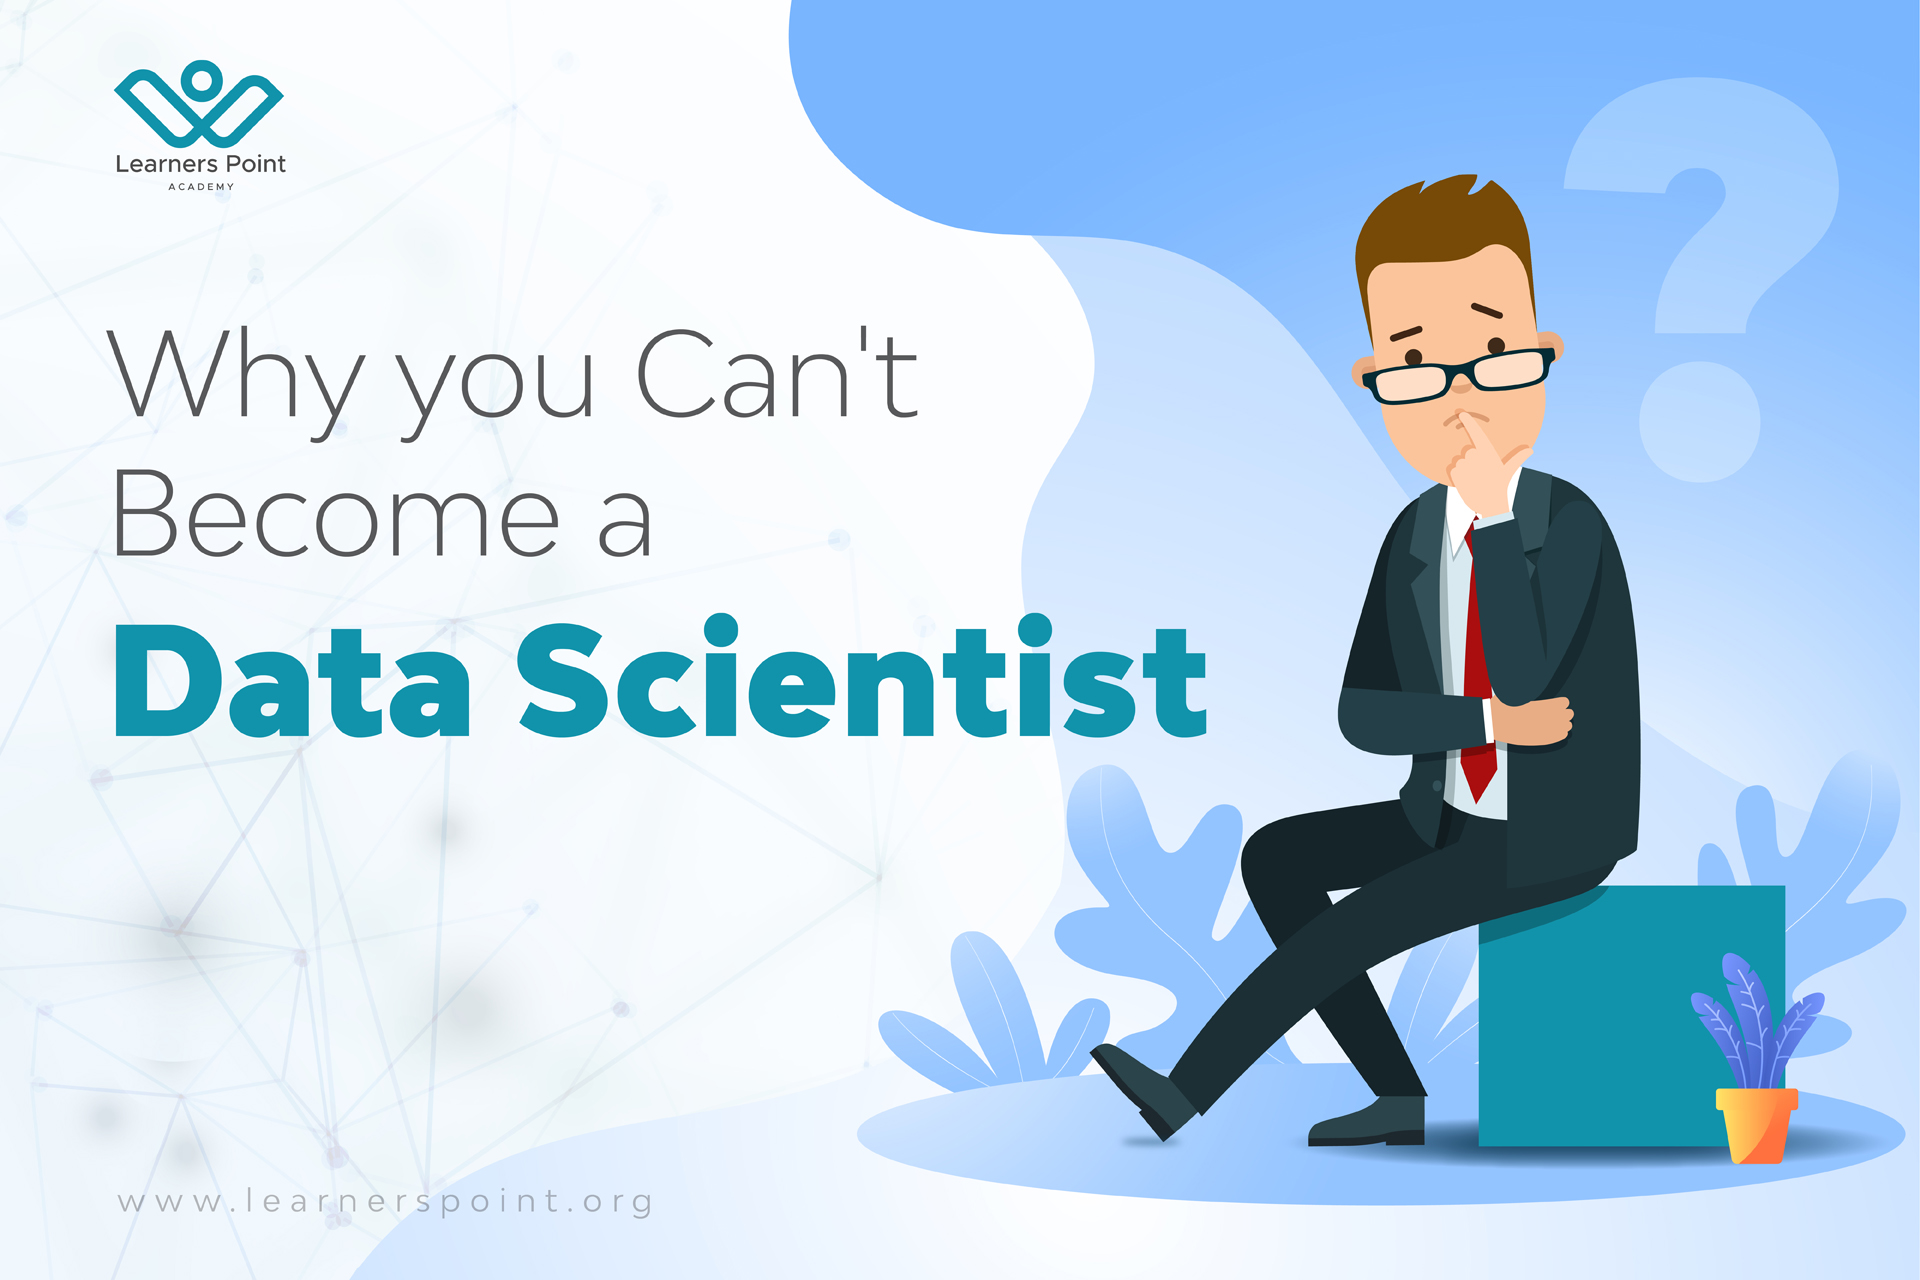 Why Data Science May NOT be the Right Career Option for You